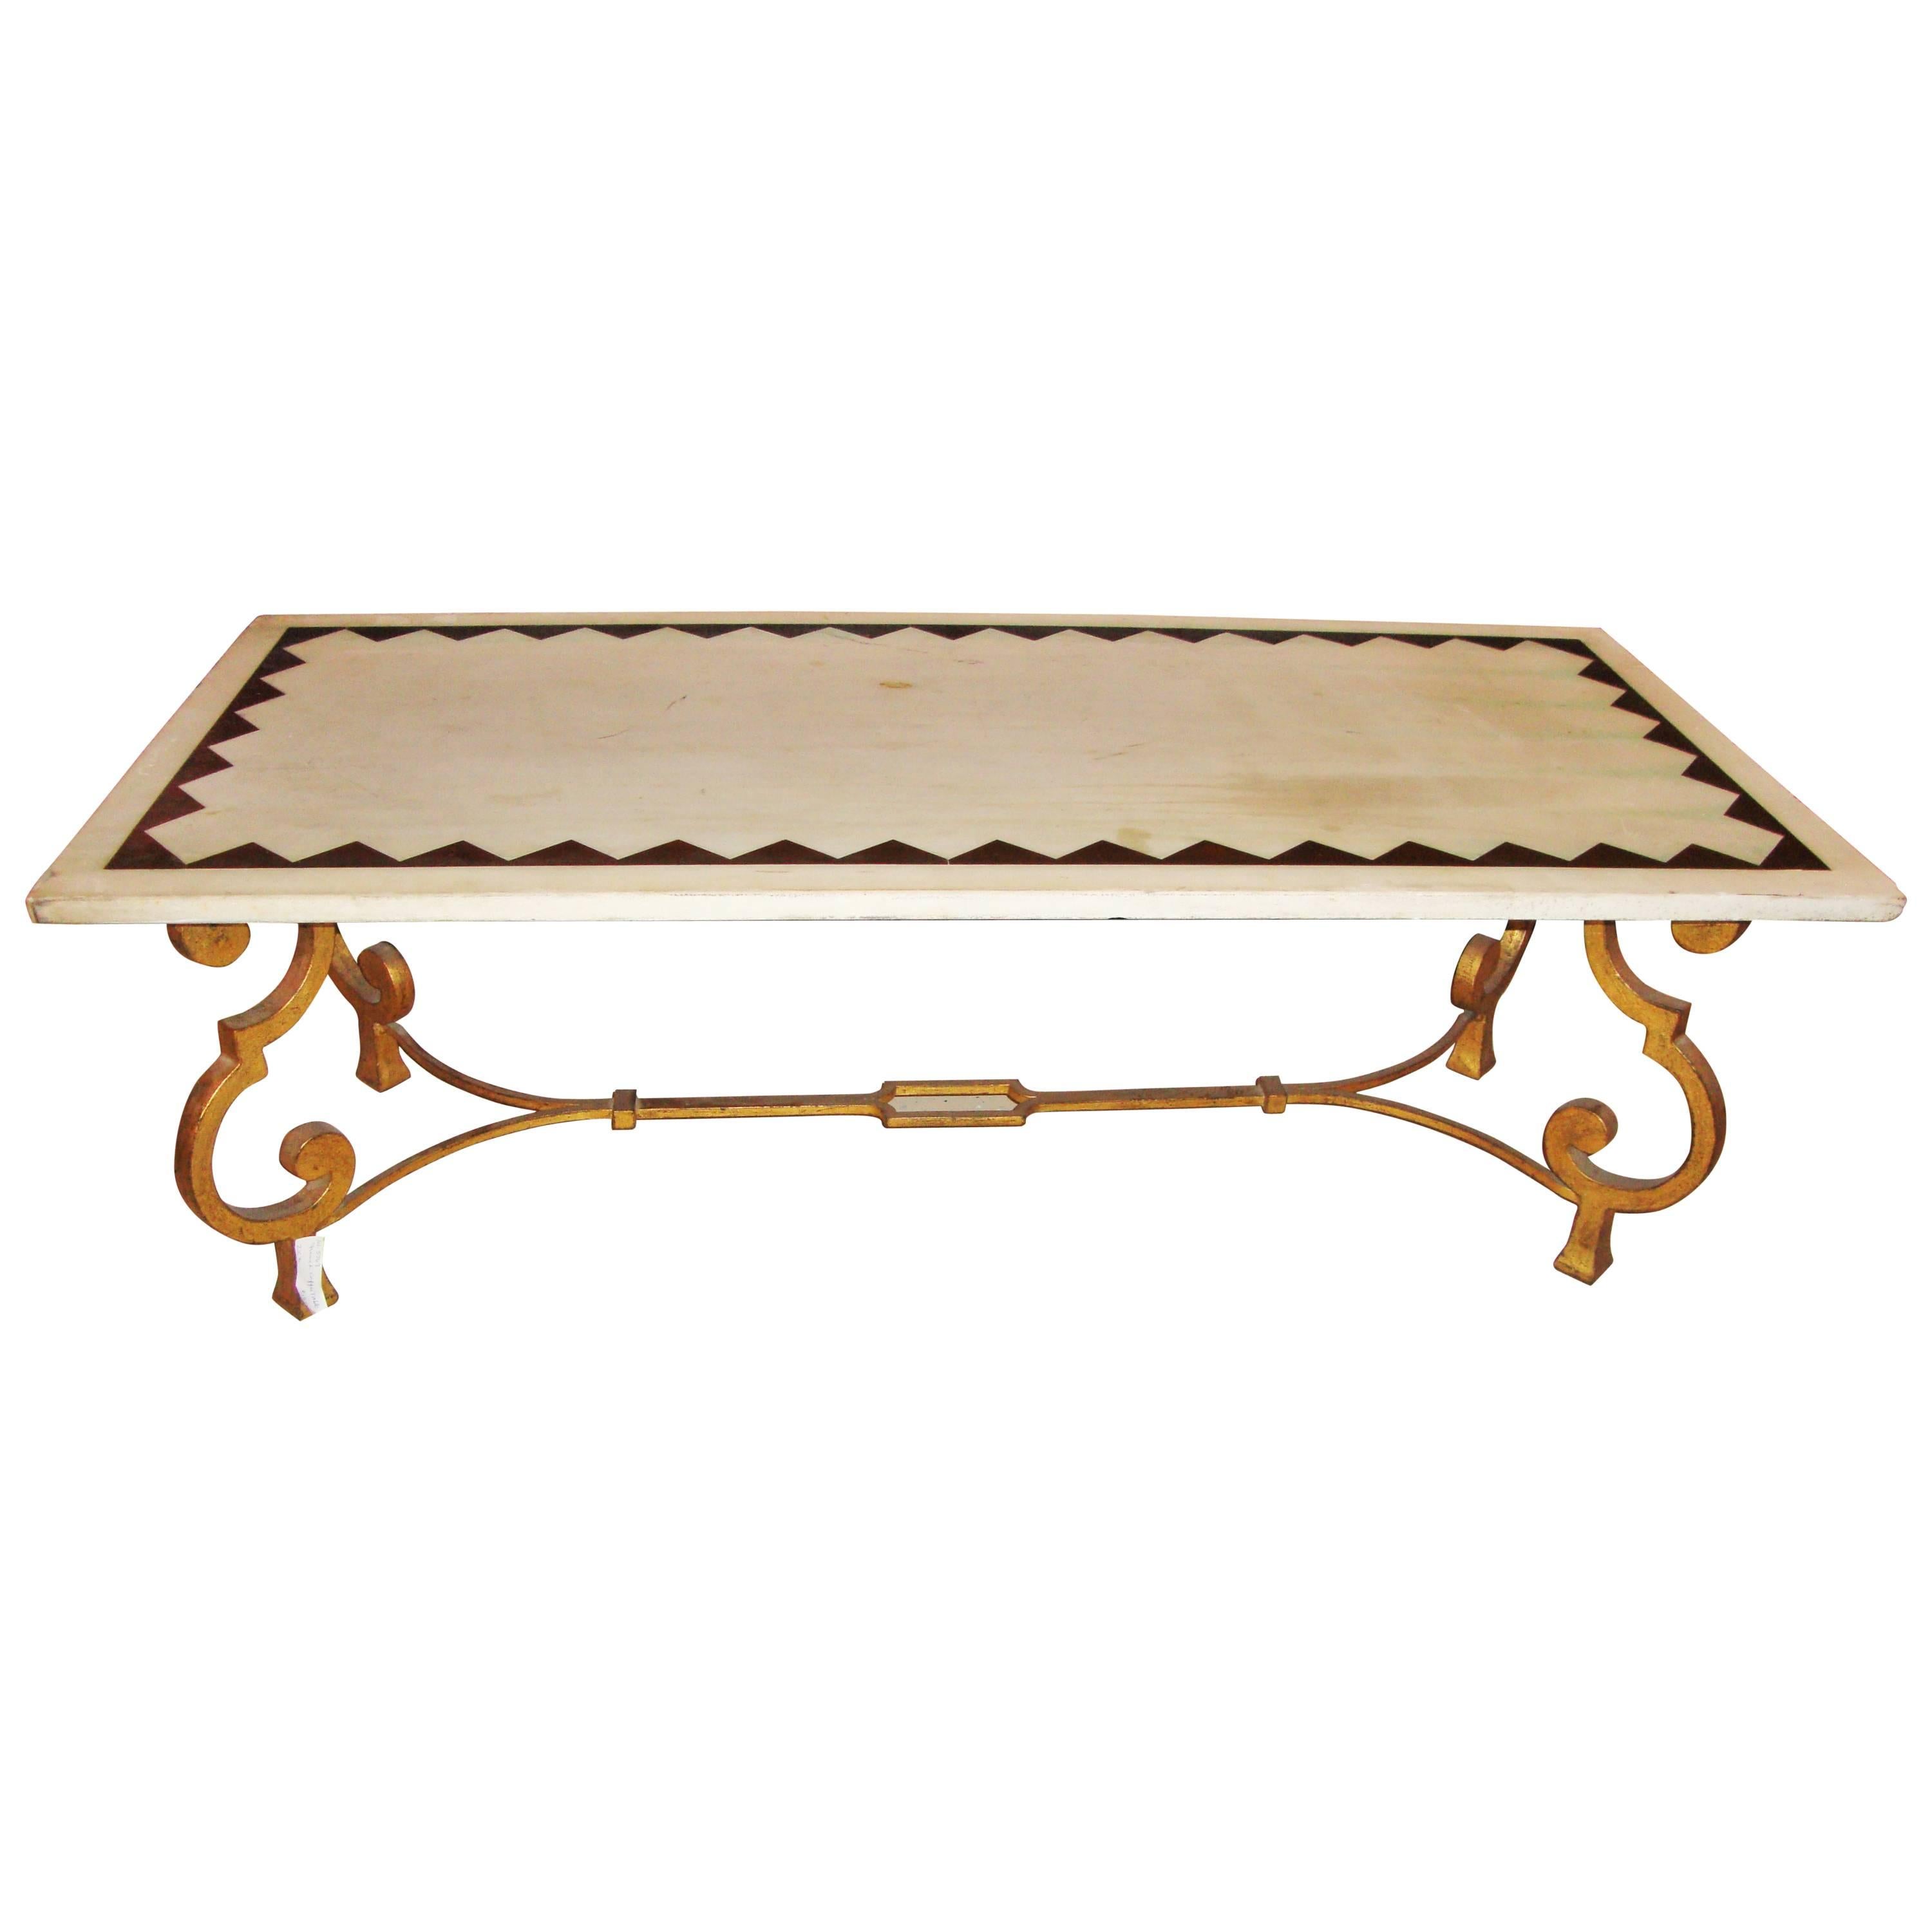 Hollywood Regency French Brass Base Coffee Cocktail Table Inlaid Marble Top